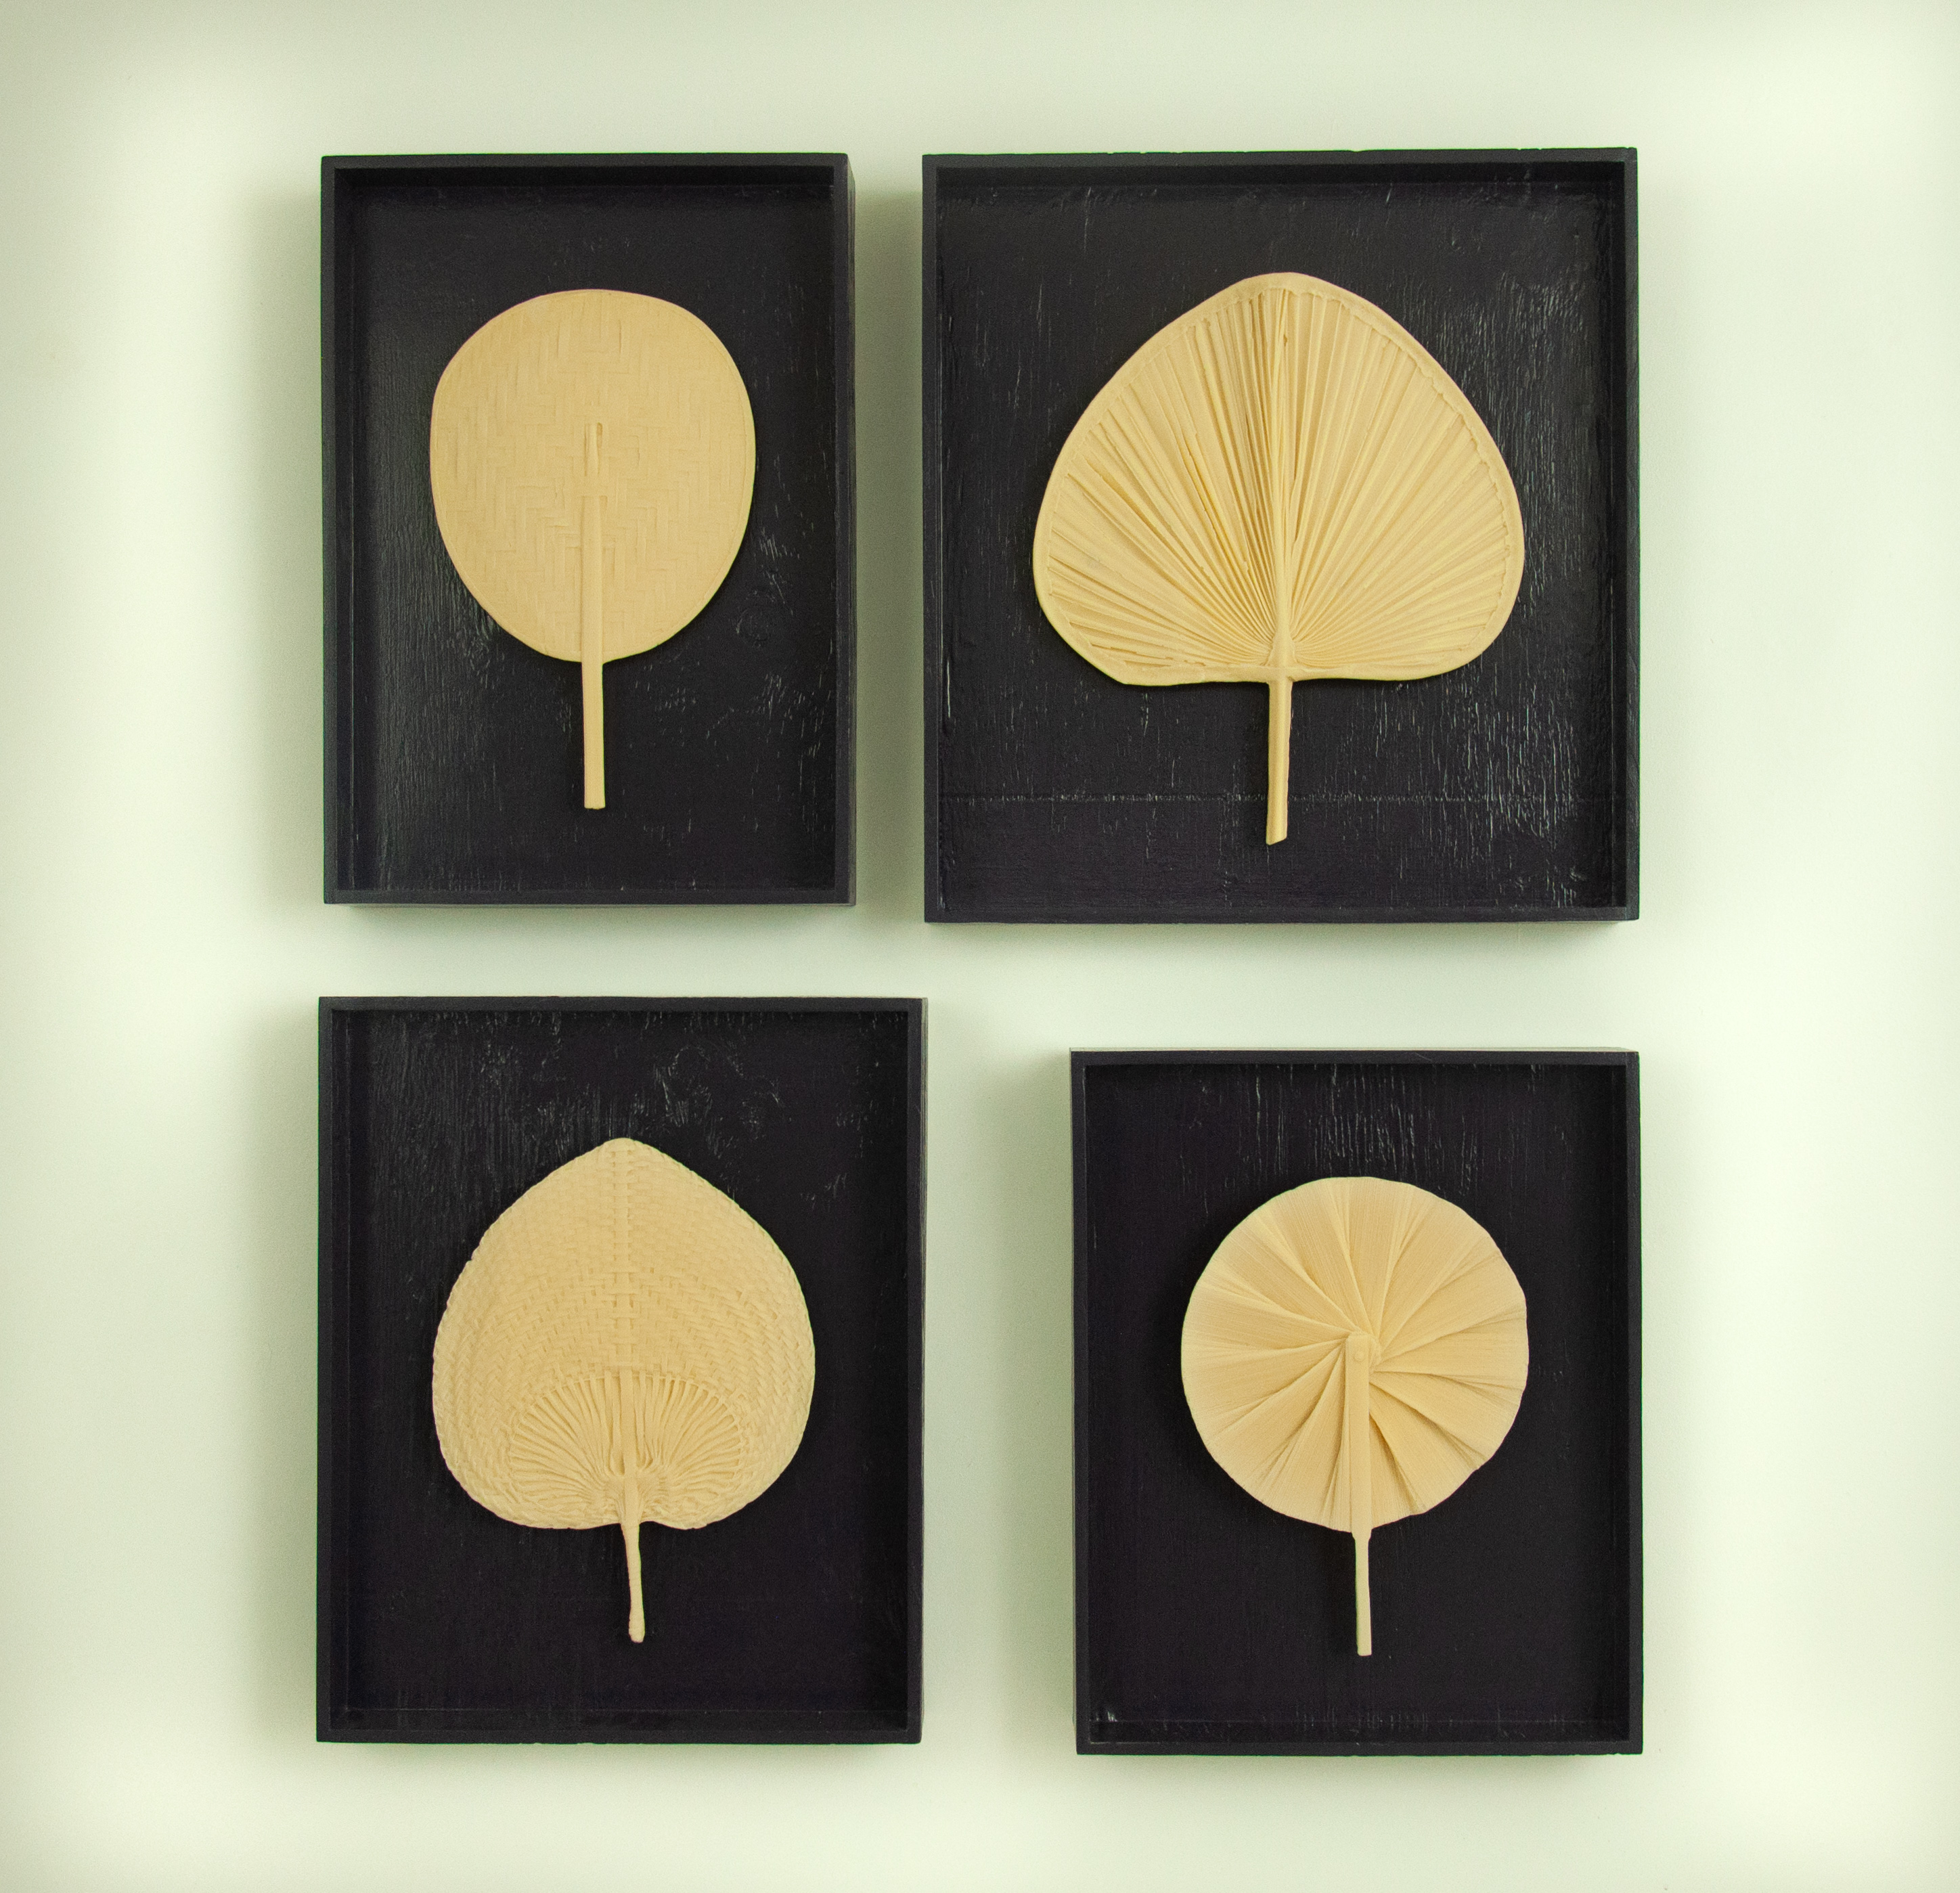 Four orange-colored hand-held fans cast in papaya soap mounted on the wall, and in dark blue open frames.